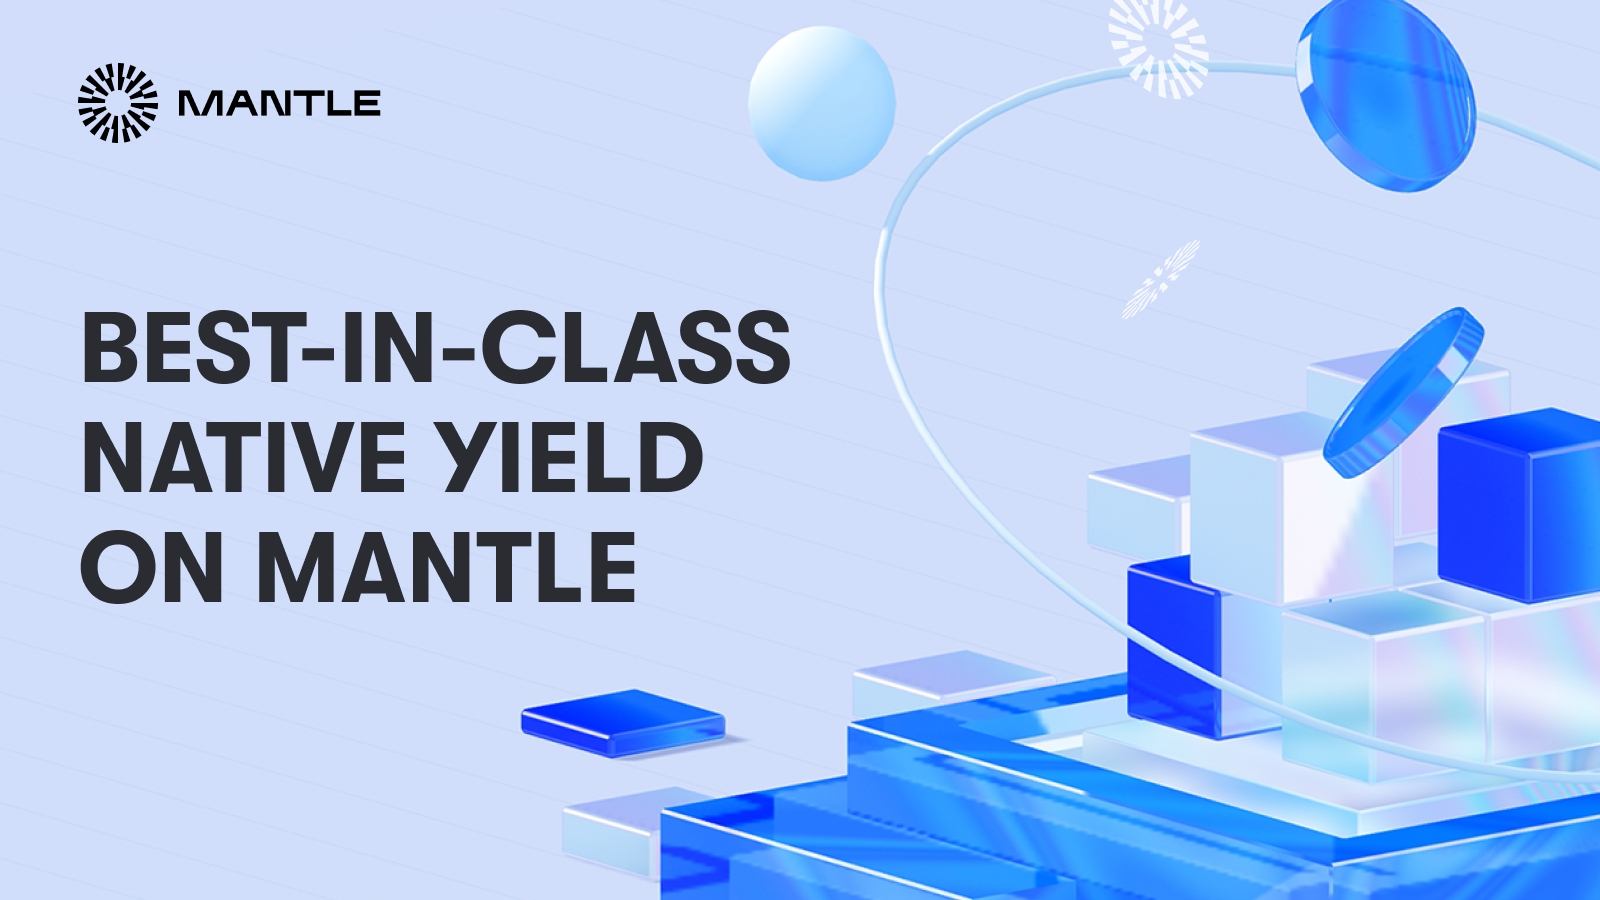 Mantle Launches Best-in-Class Native Yield